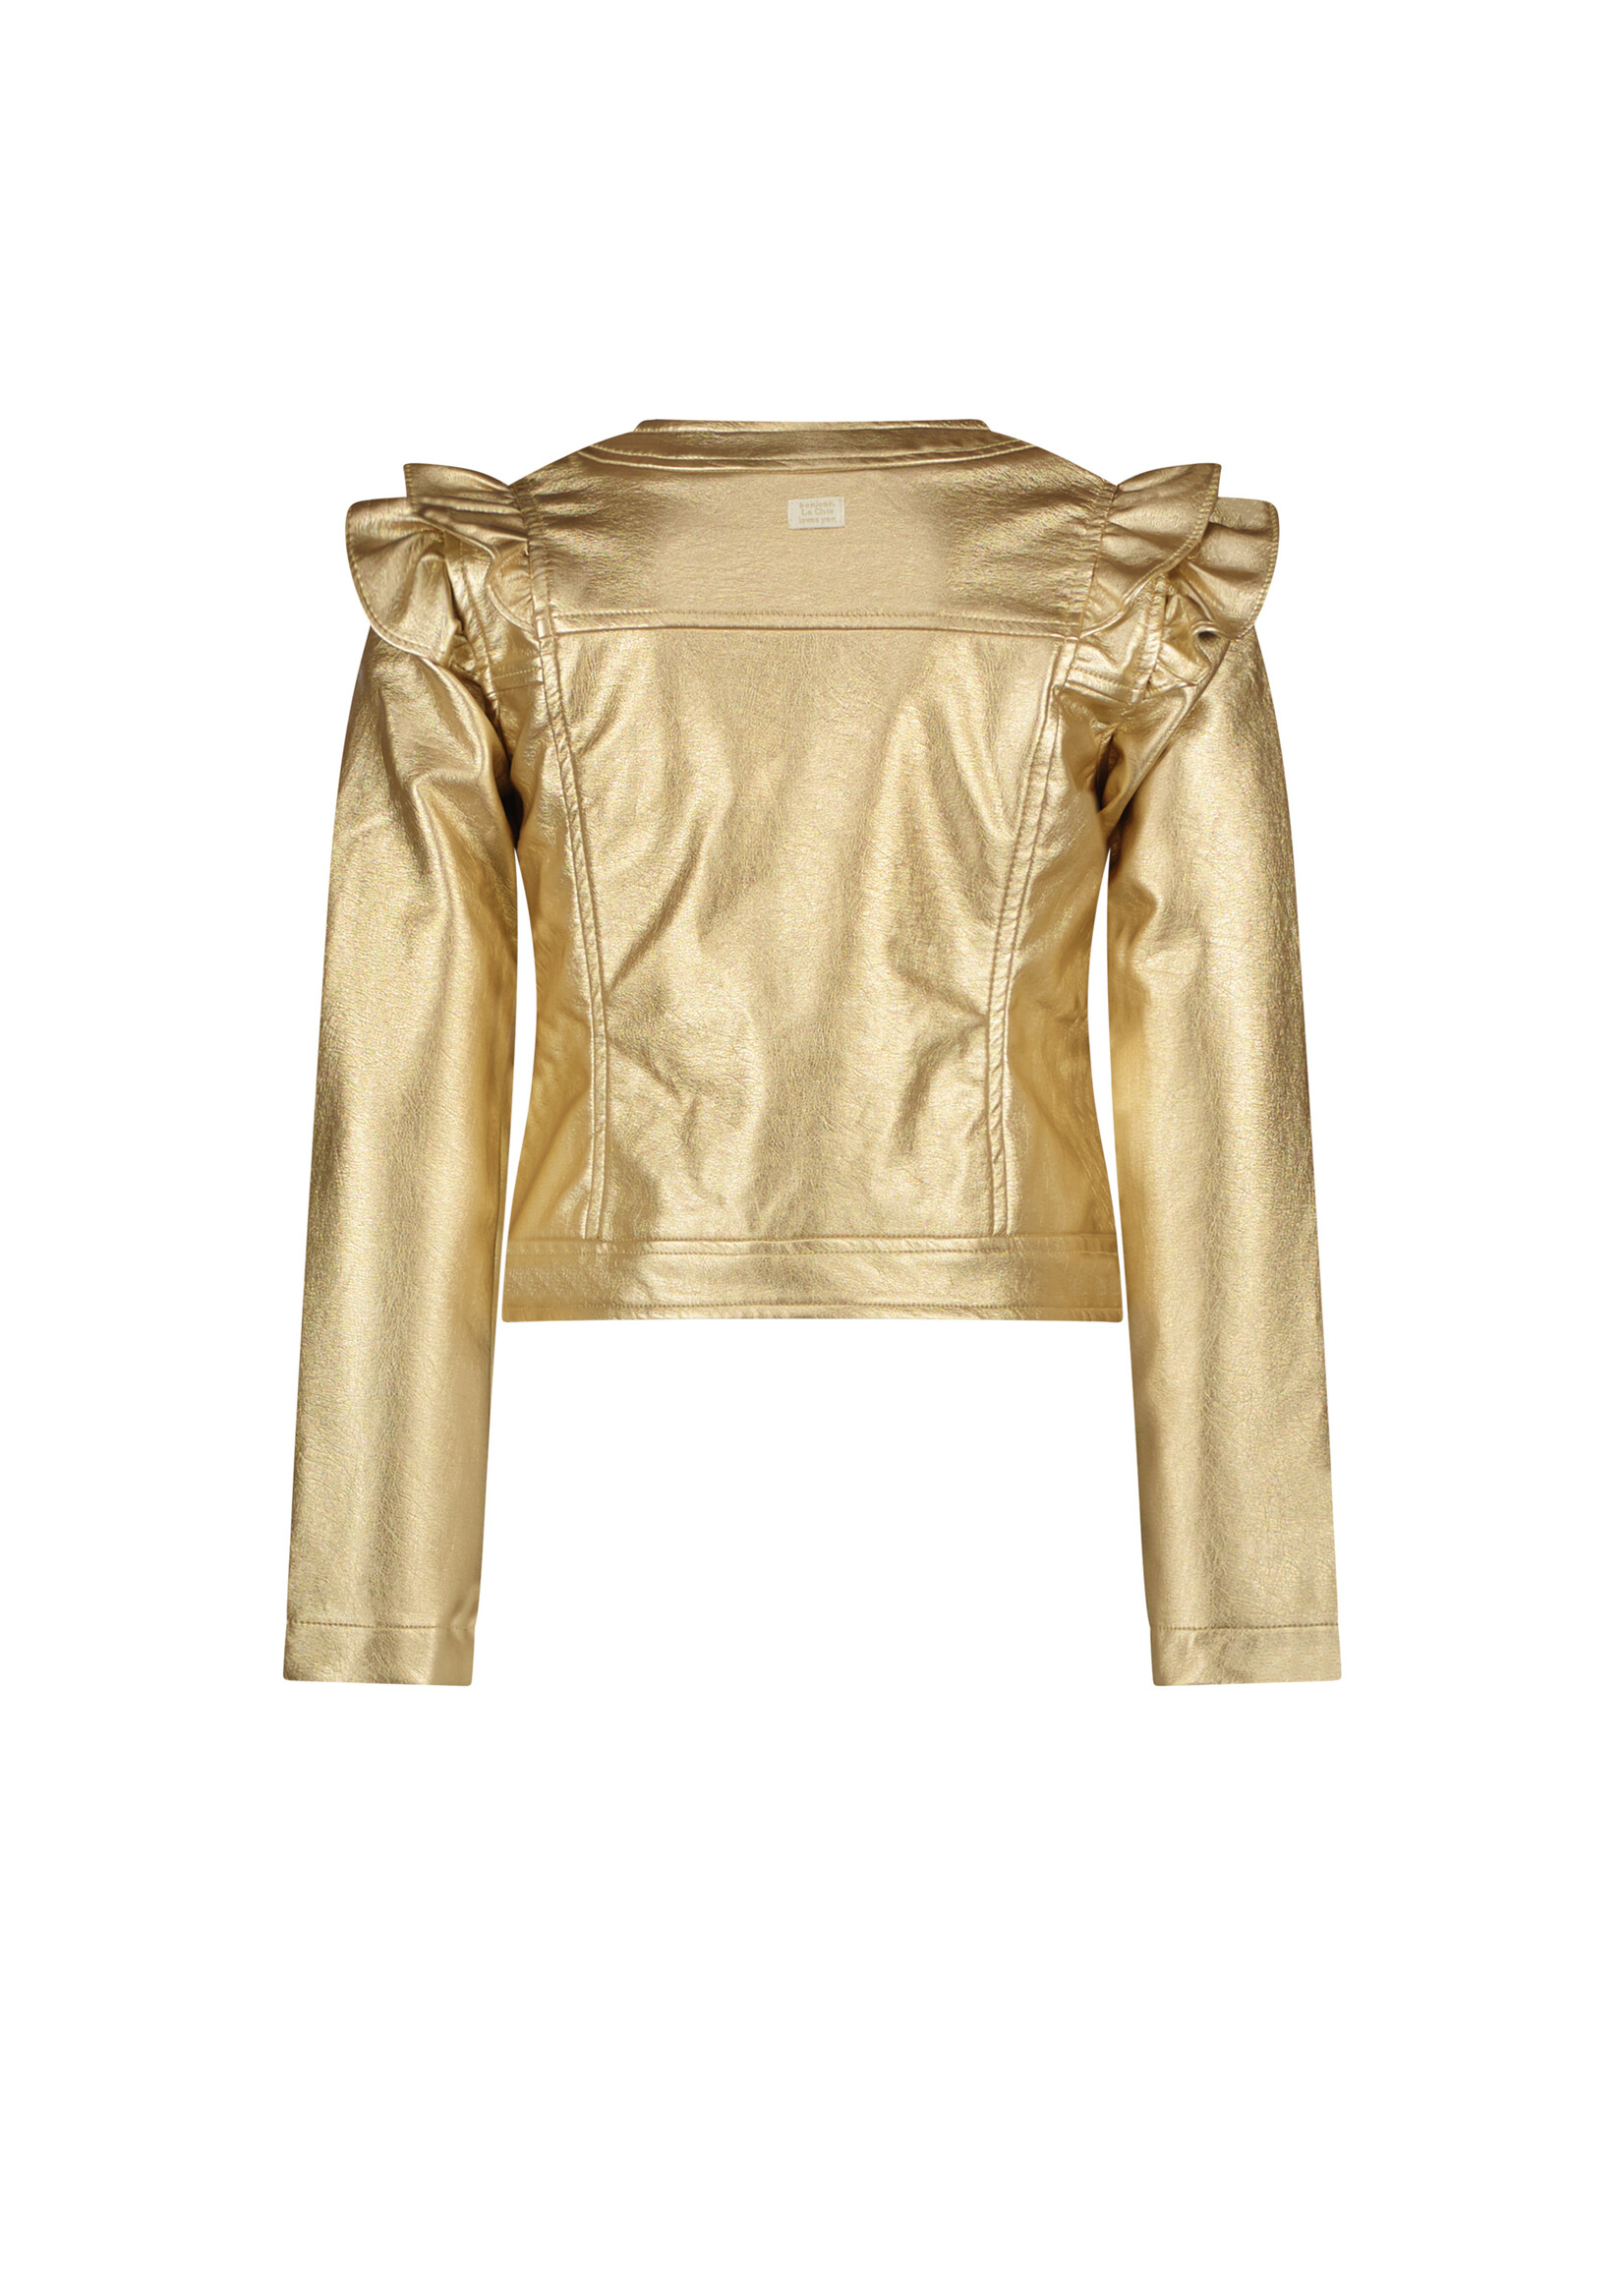 Le Chic Girls Kids C312-5120 ARLYN gold fake leather jacket Champagne